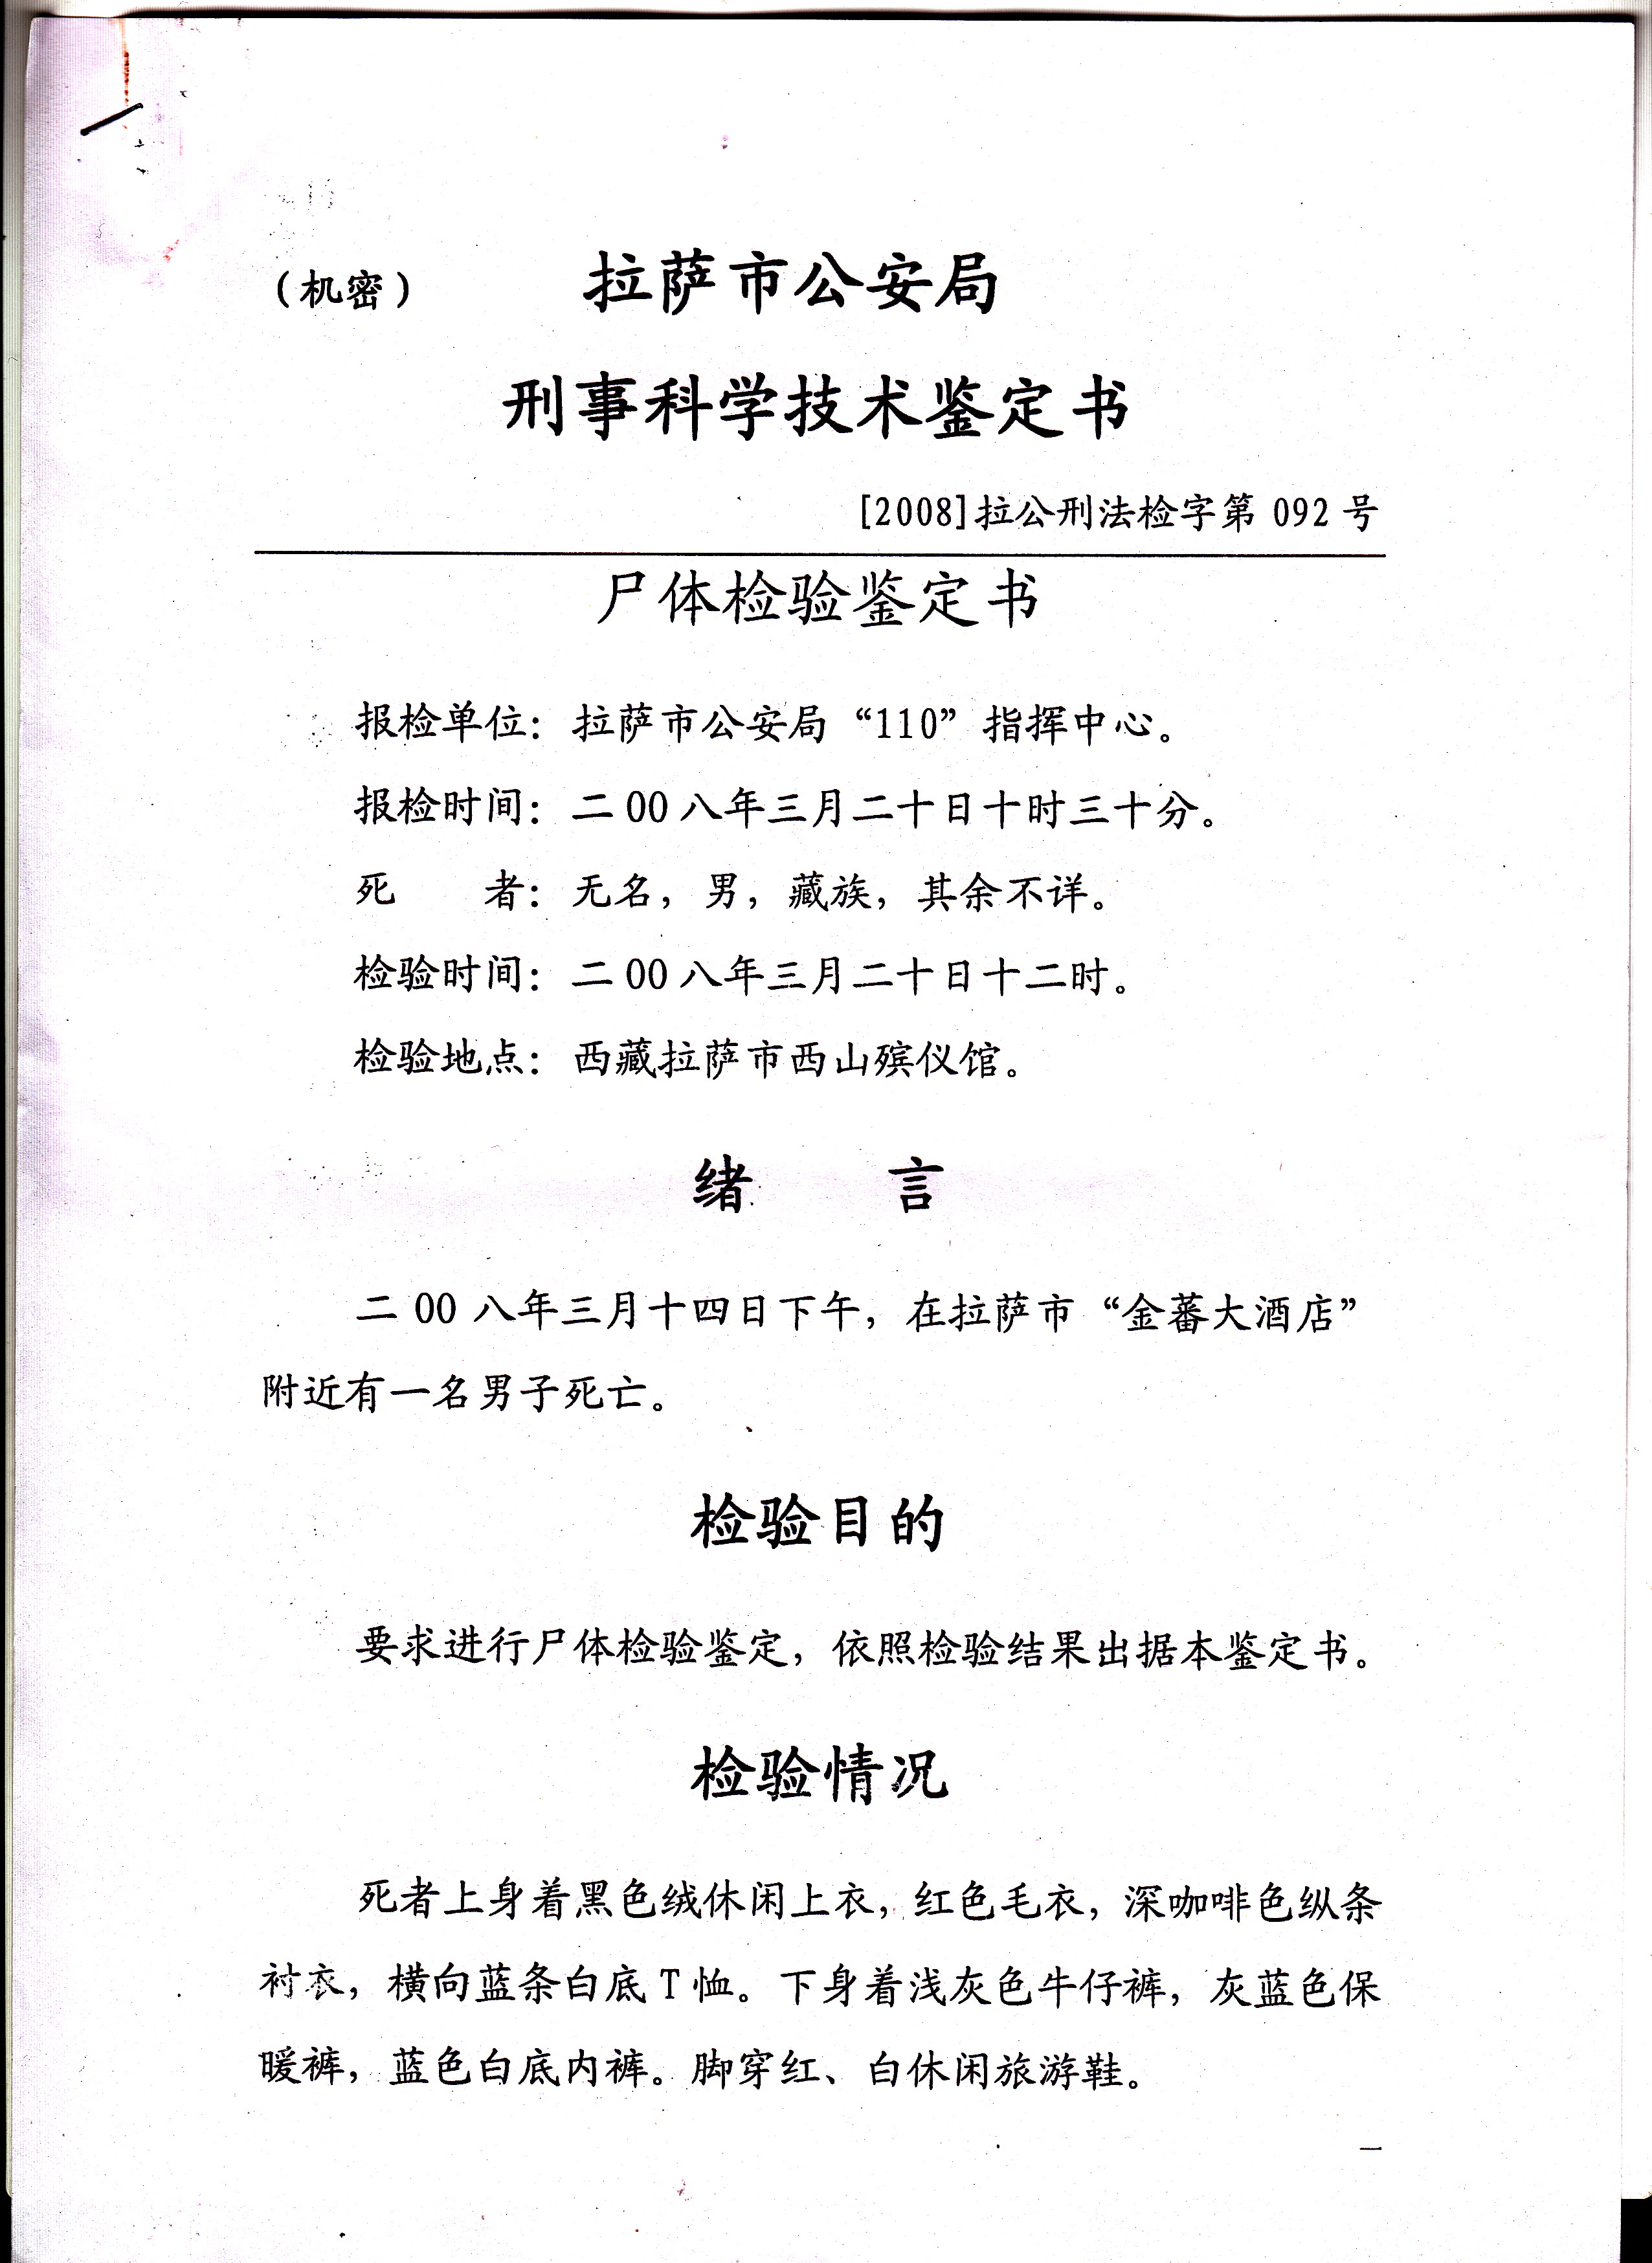 Secret document prepared by the criminal and medical department of the Lhasa Public Security Bureau. (Courtesy: TCHRD)